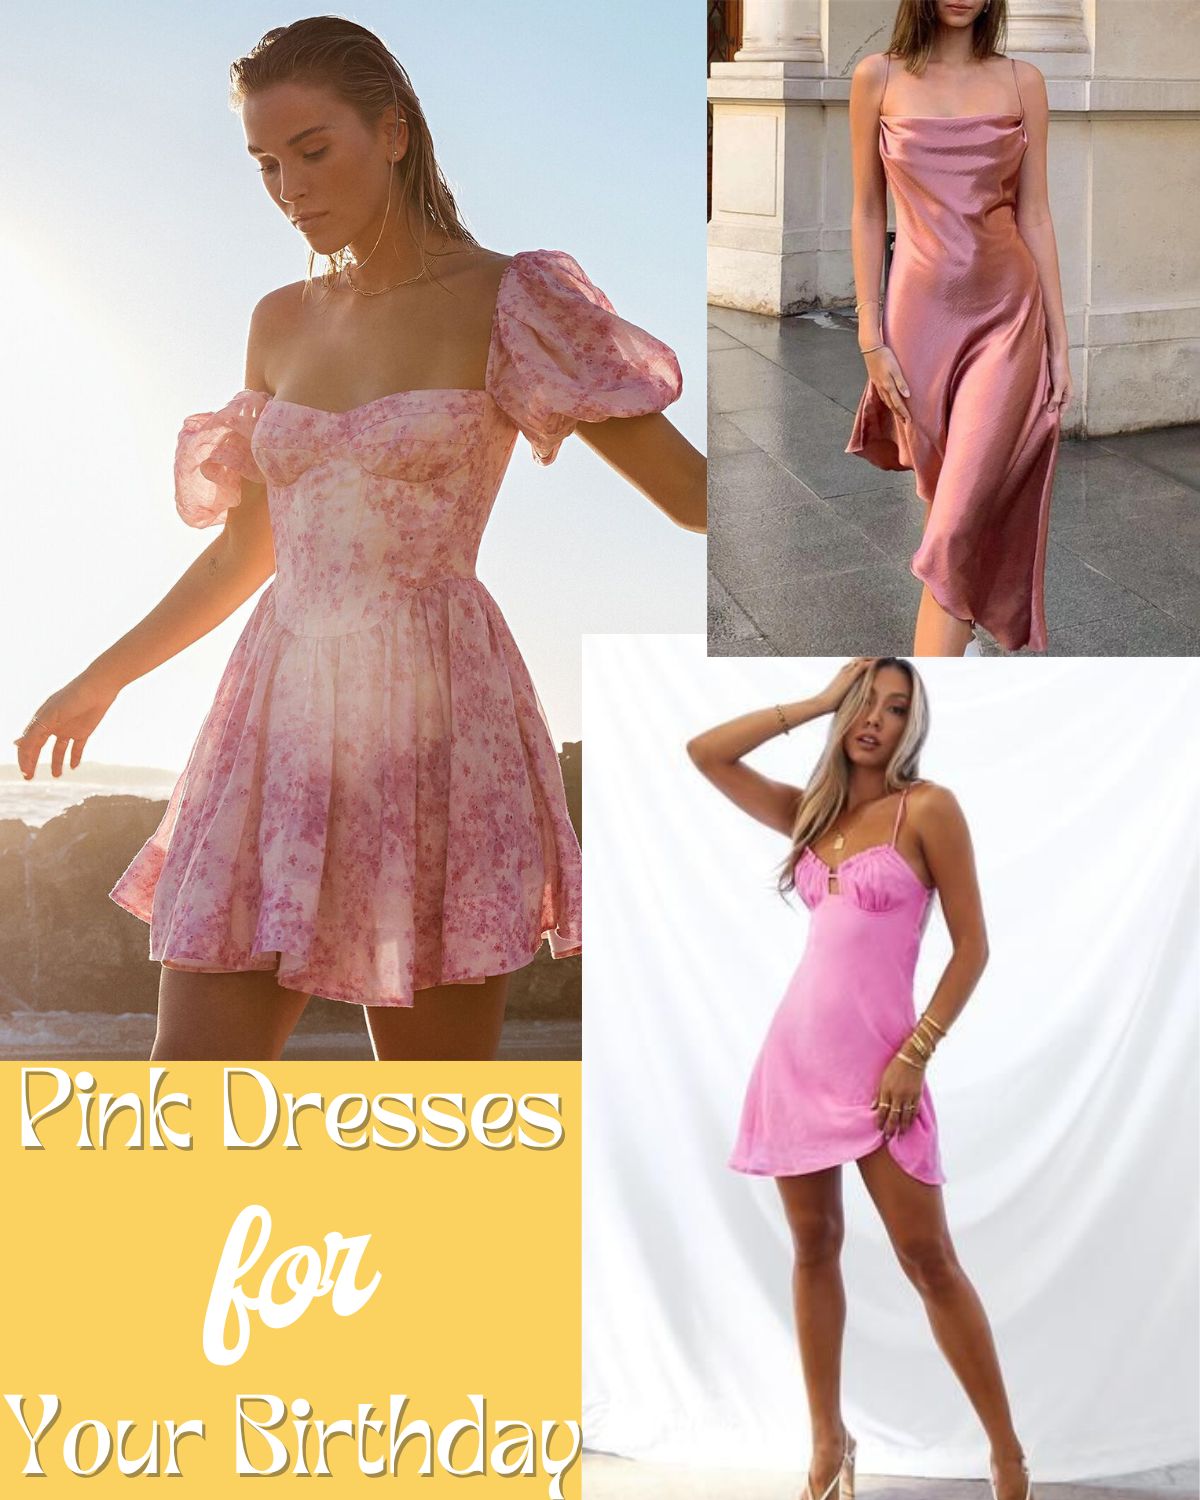 Dresses that are pink